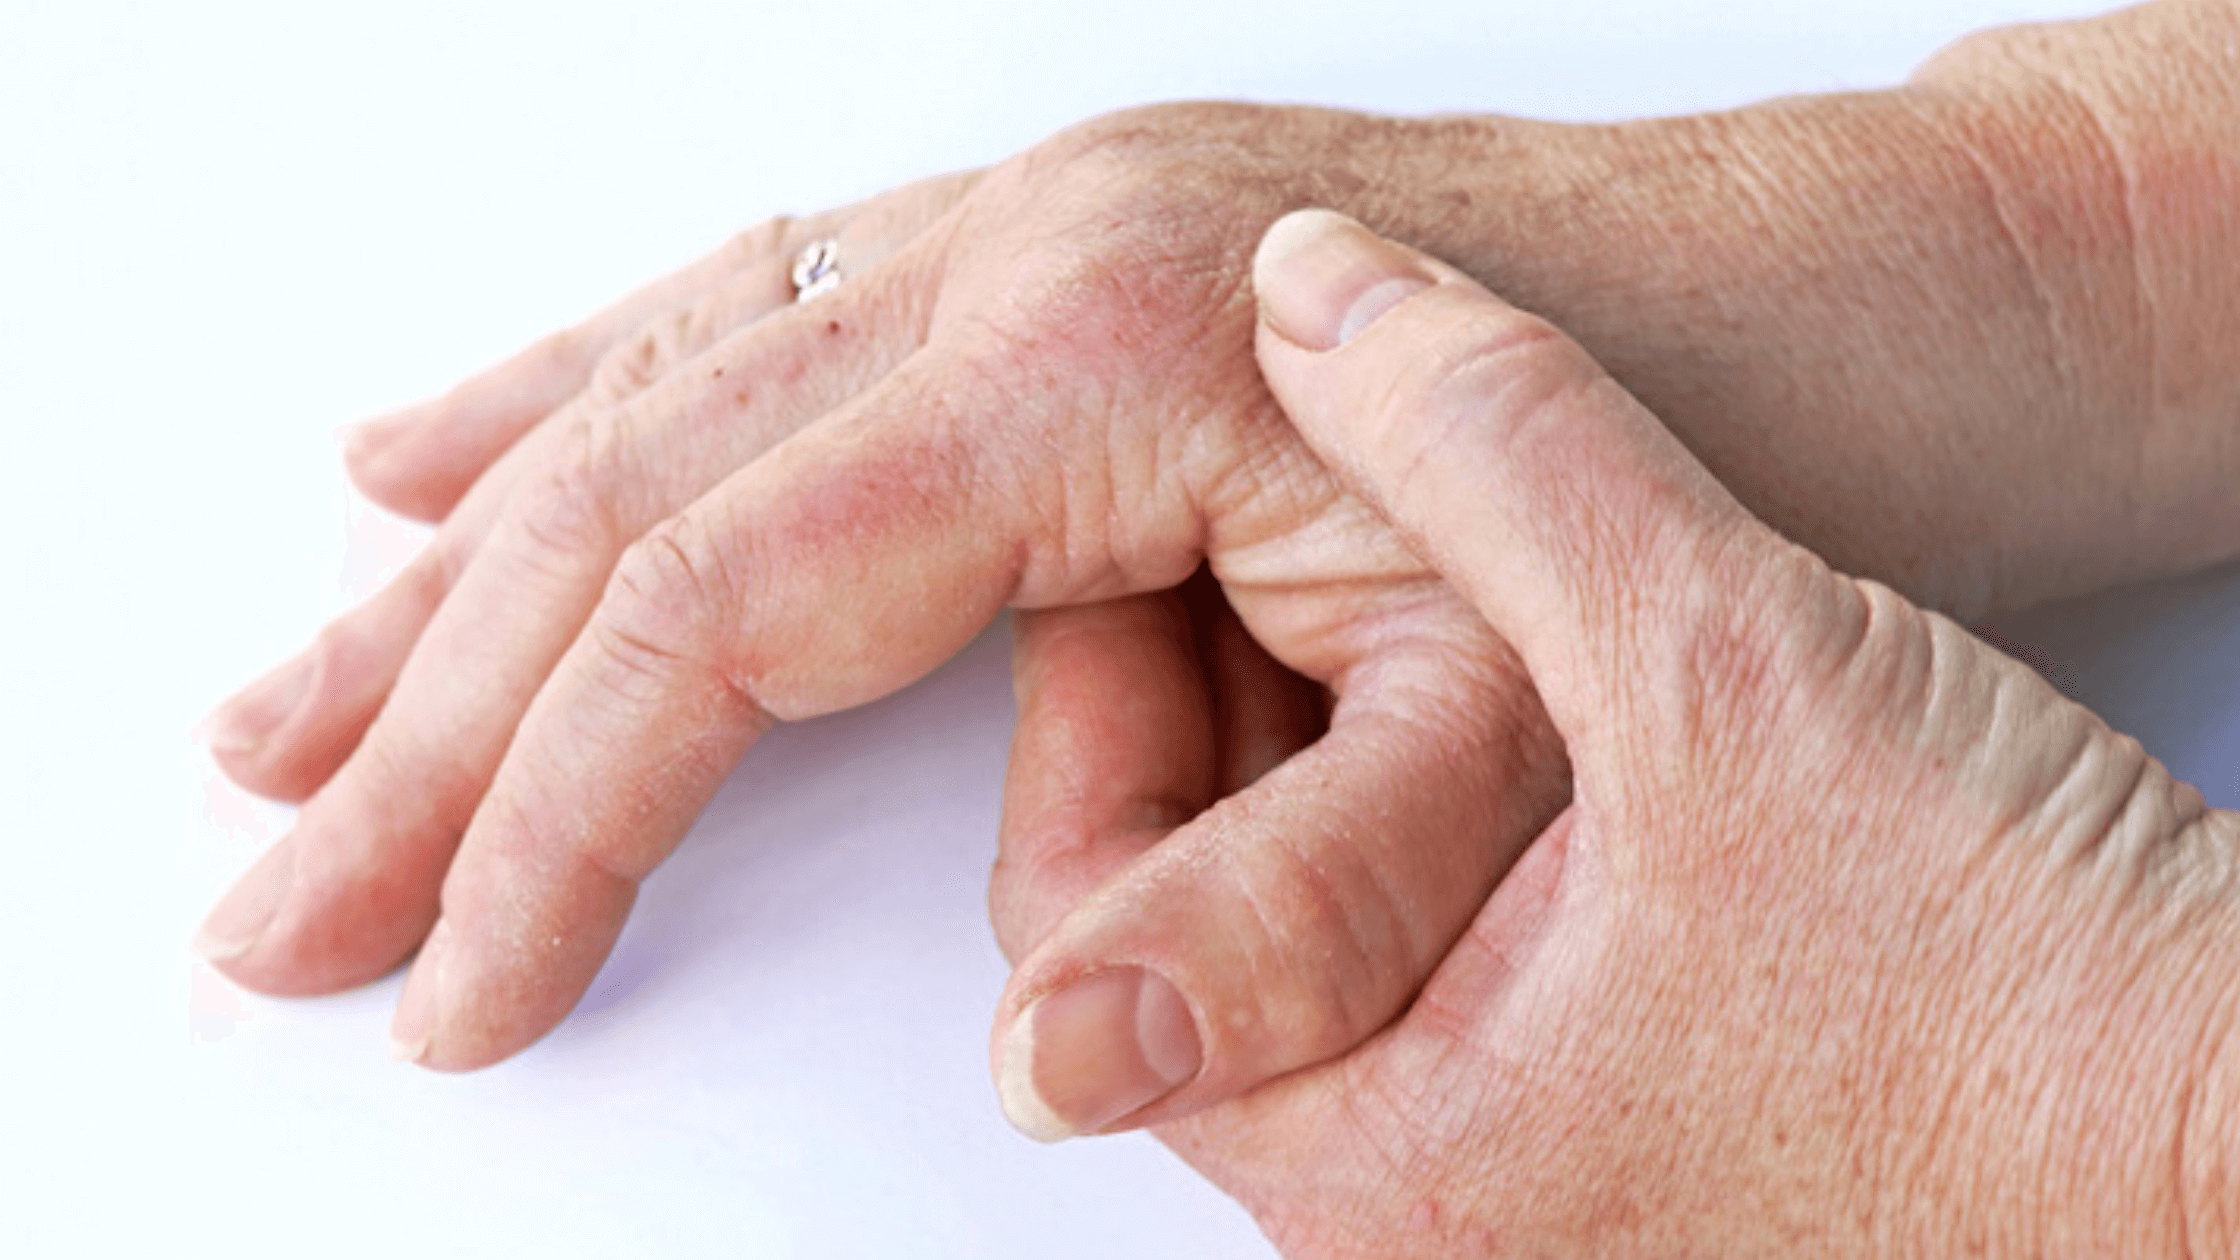 Psoriatic Arthritis Treatments Are Not Getting Better Results